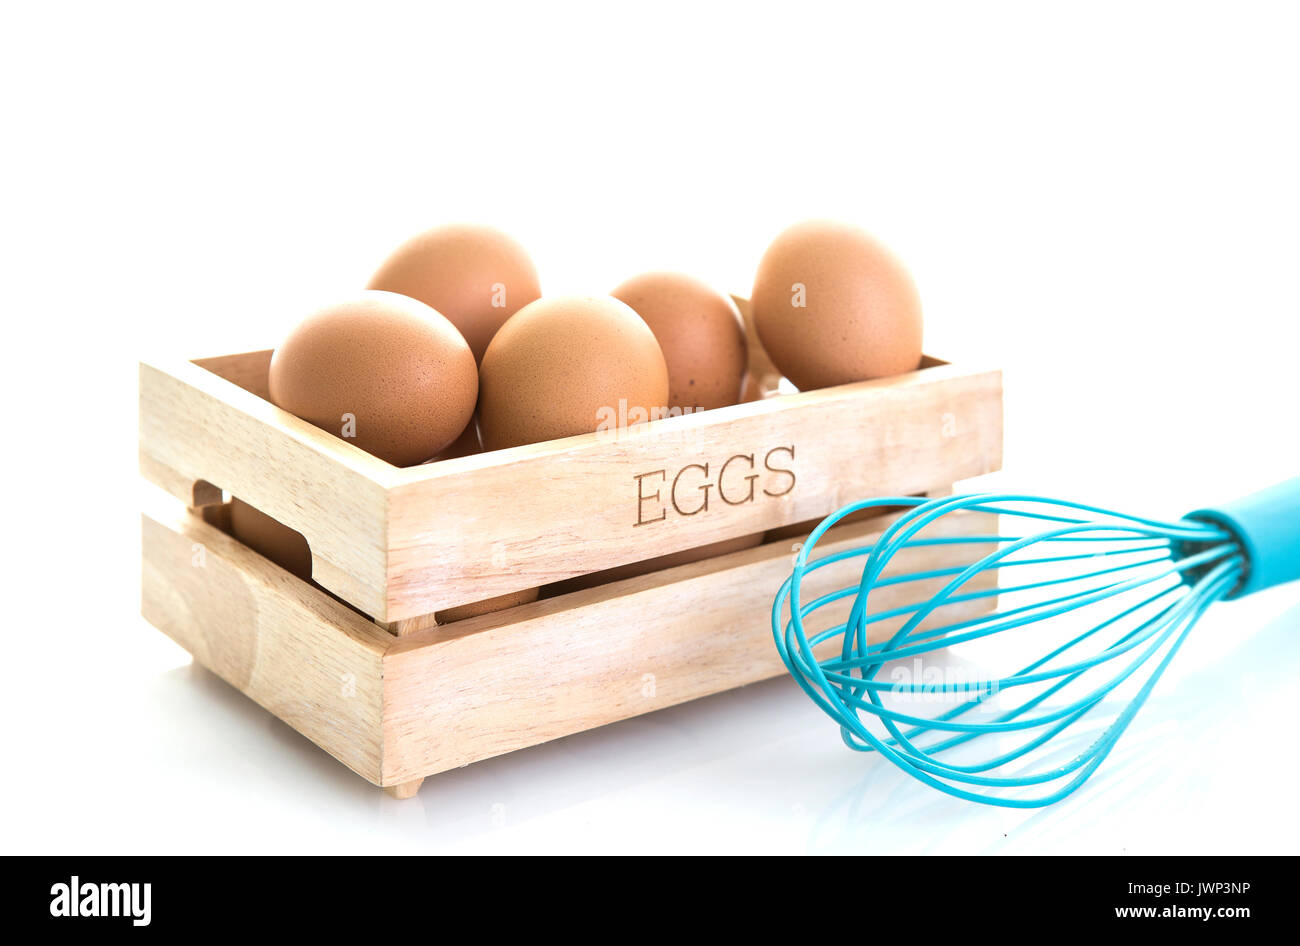 Eggs in a wooden box with blue egg whisk on a white background Stock Photo